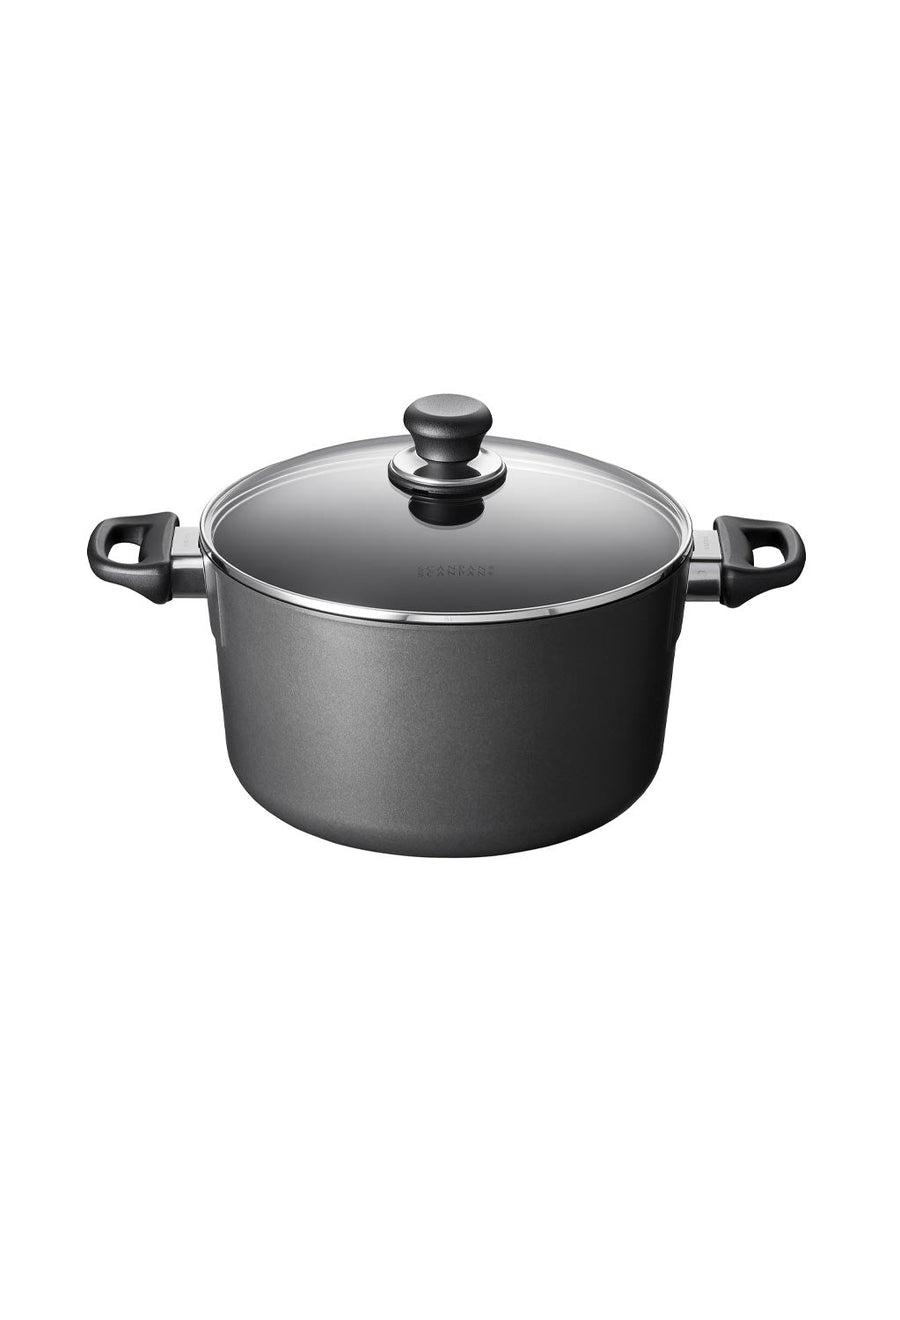 Scanpan Classic Induction Dutch Oven with lid